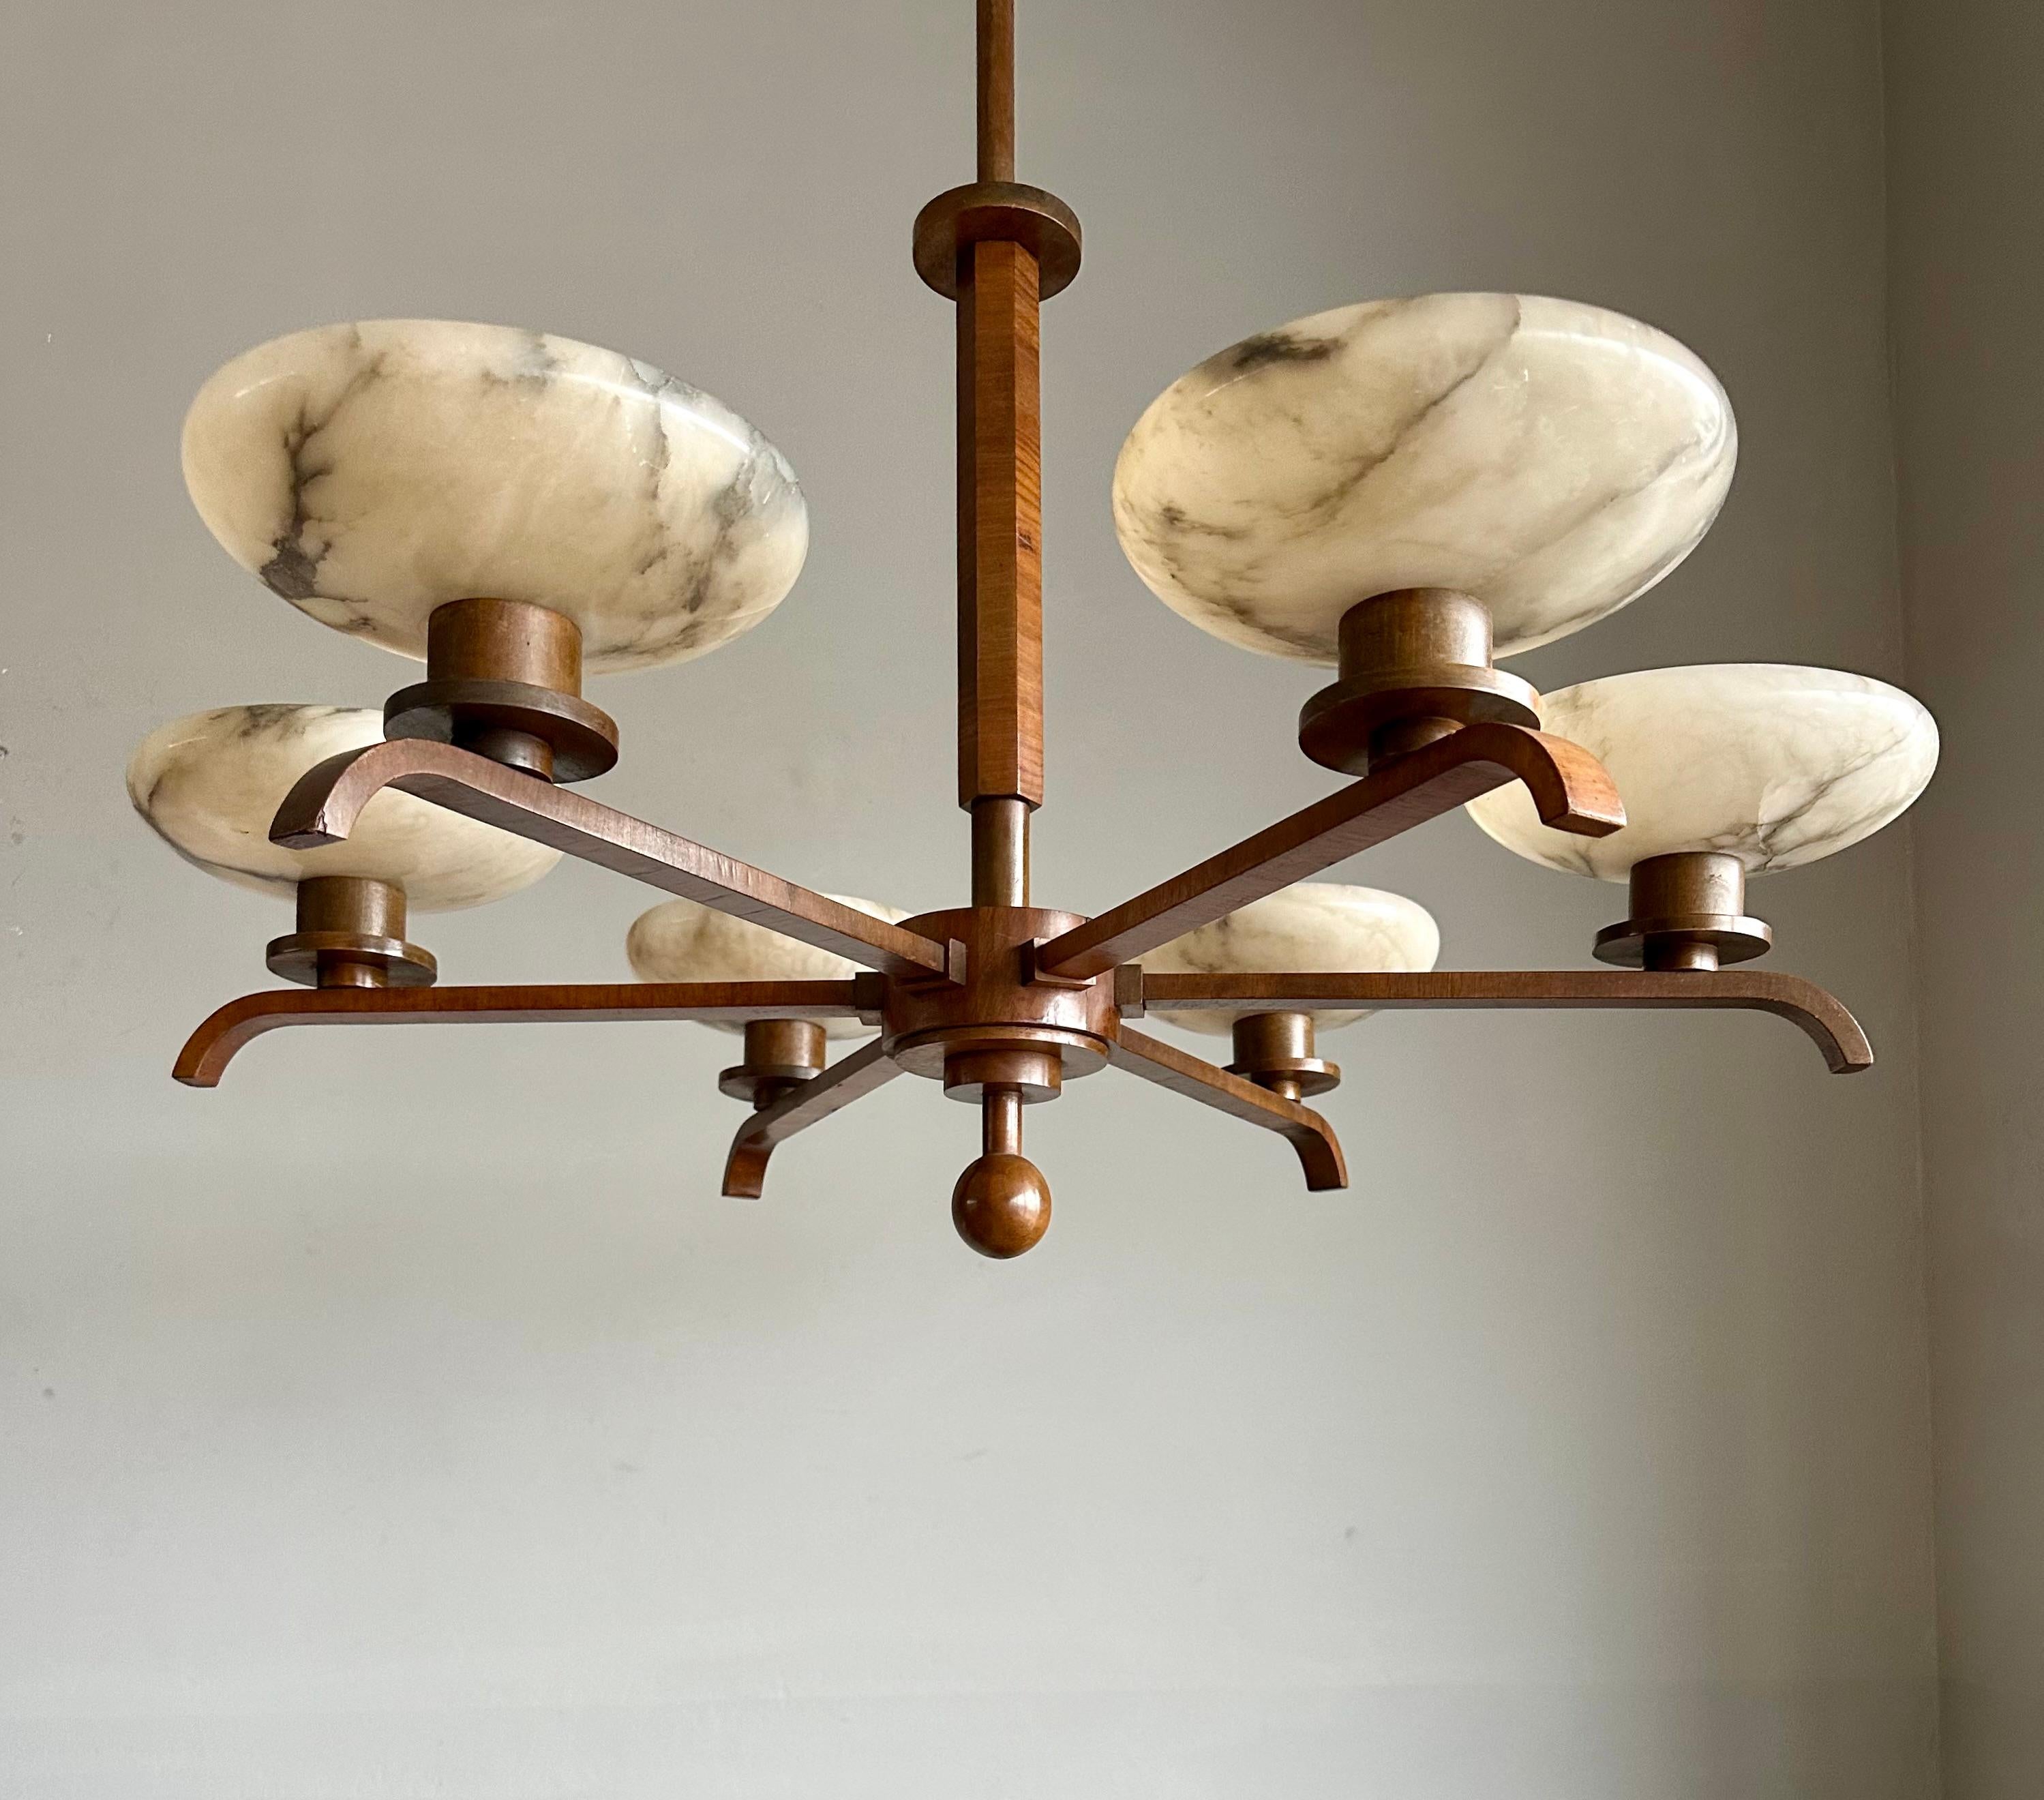 This also unique and large size, eye pleasing Art Deco chandelier, stands out for several reasons:

Firstly, it has a stunning & solid, nutwood veneered 'body' which is in very good condition. 
Secondly, its perfect Art Deco design makes it a true